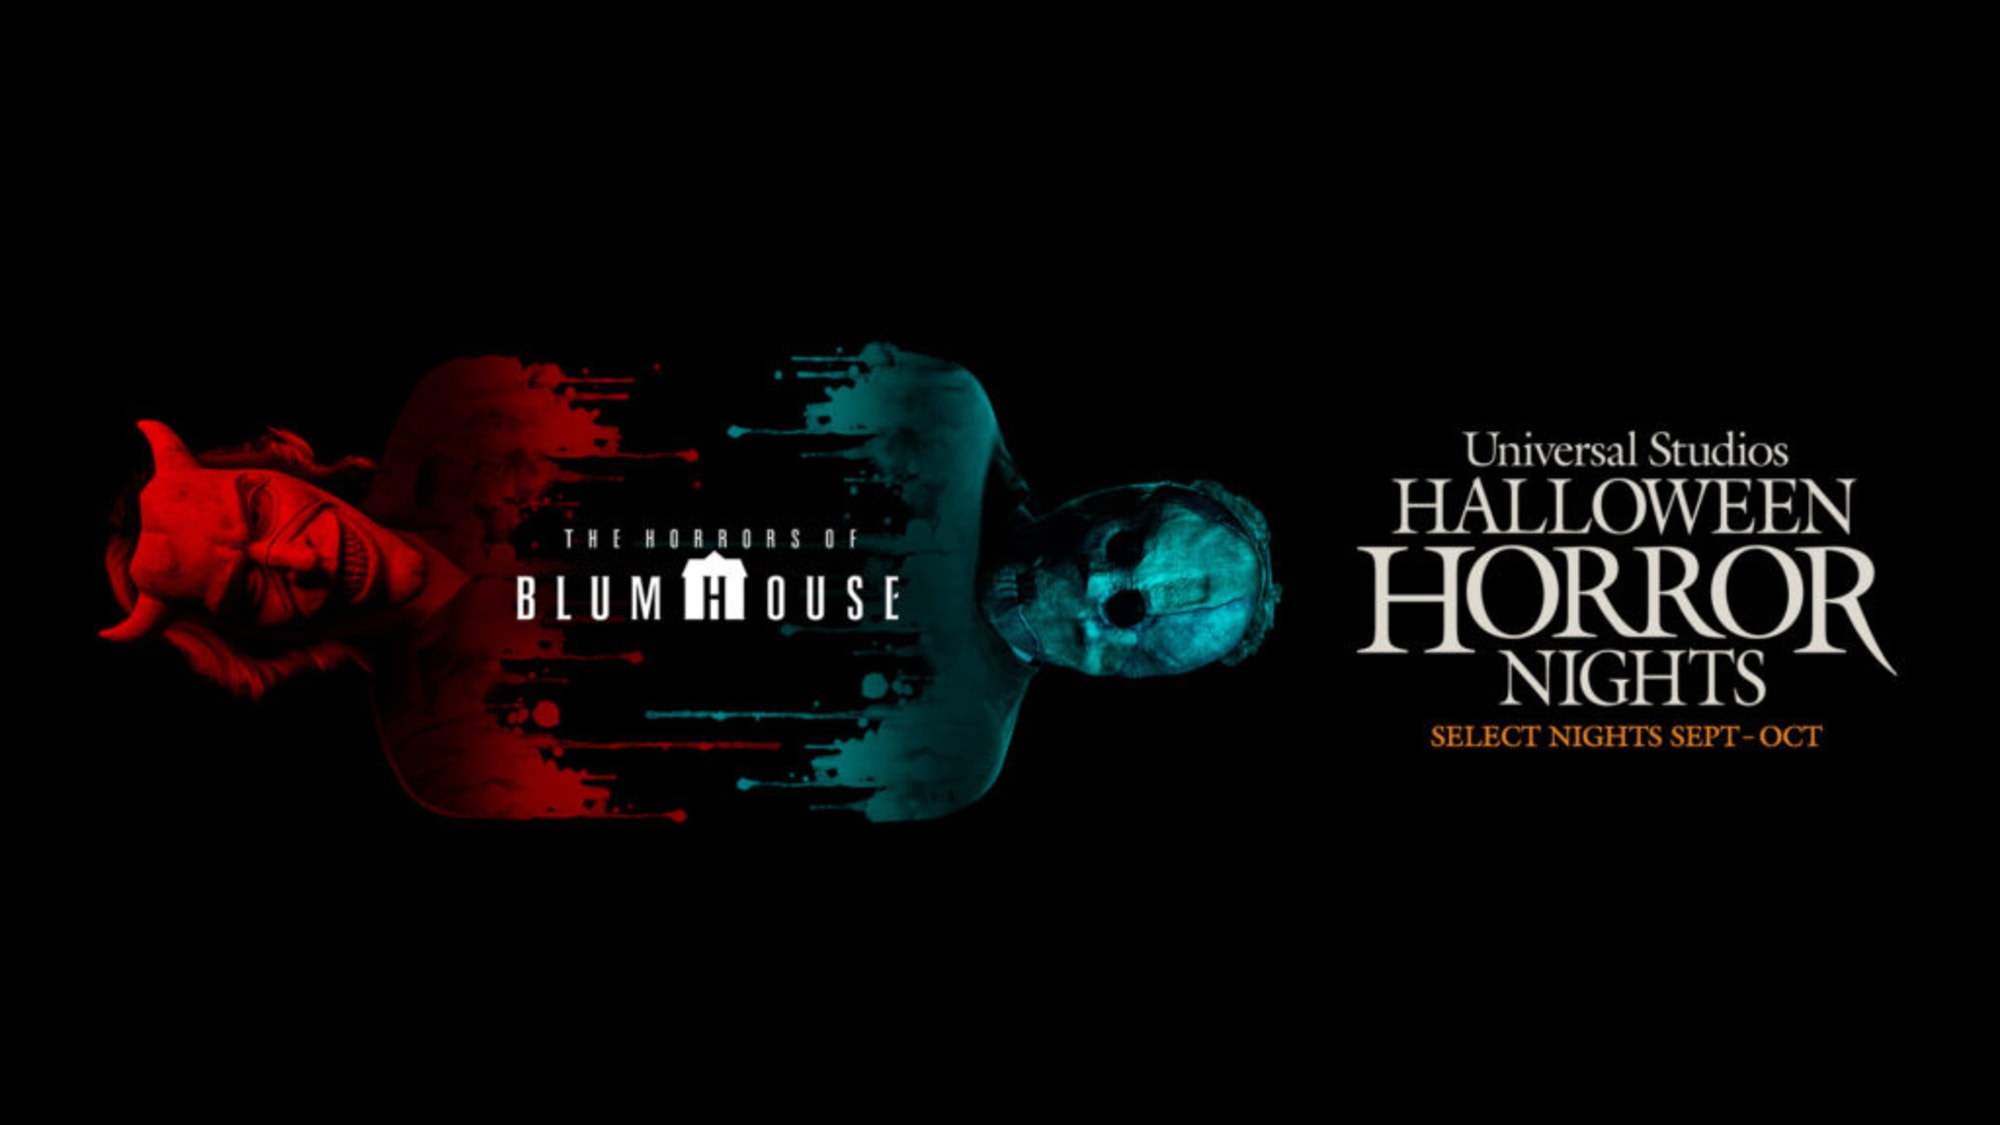 Universal Studios announces another Halloween Horror Nights house